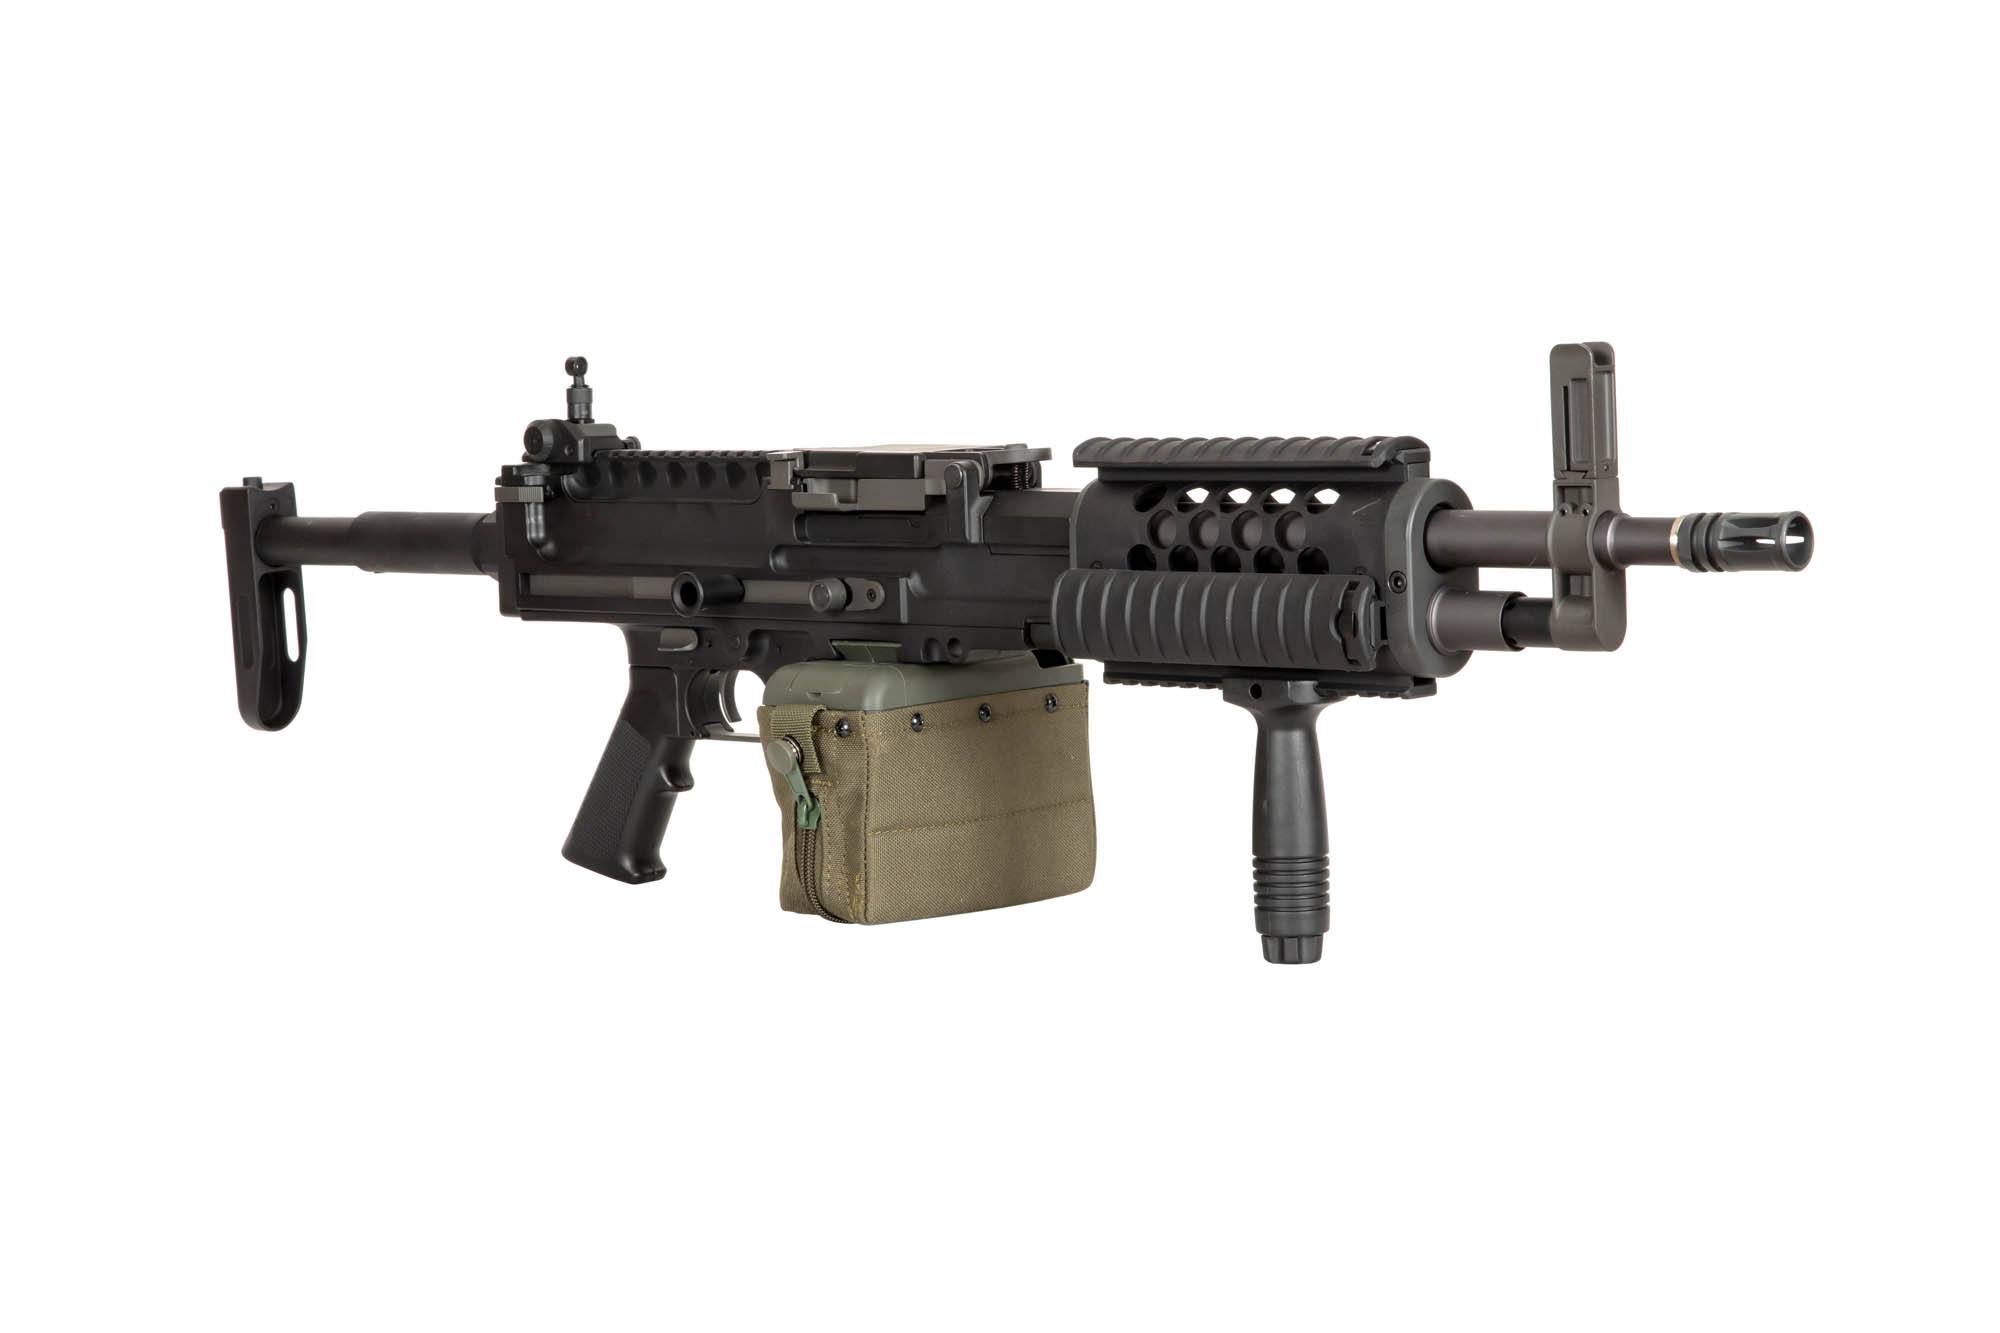 LMG Ares Airsoft